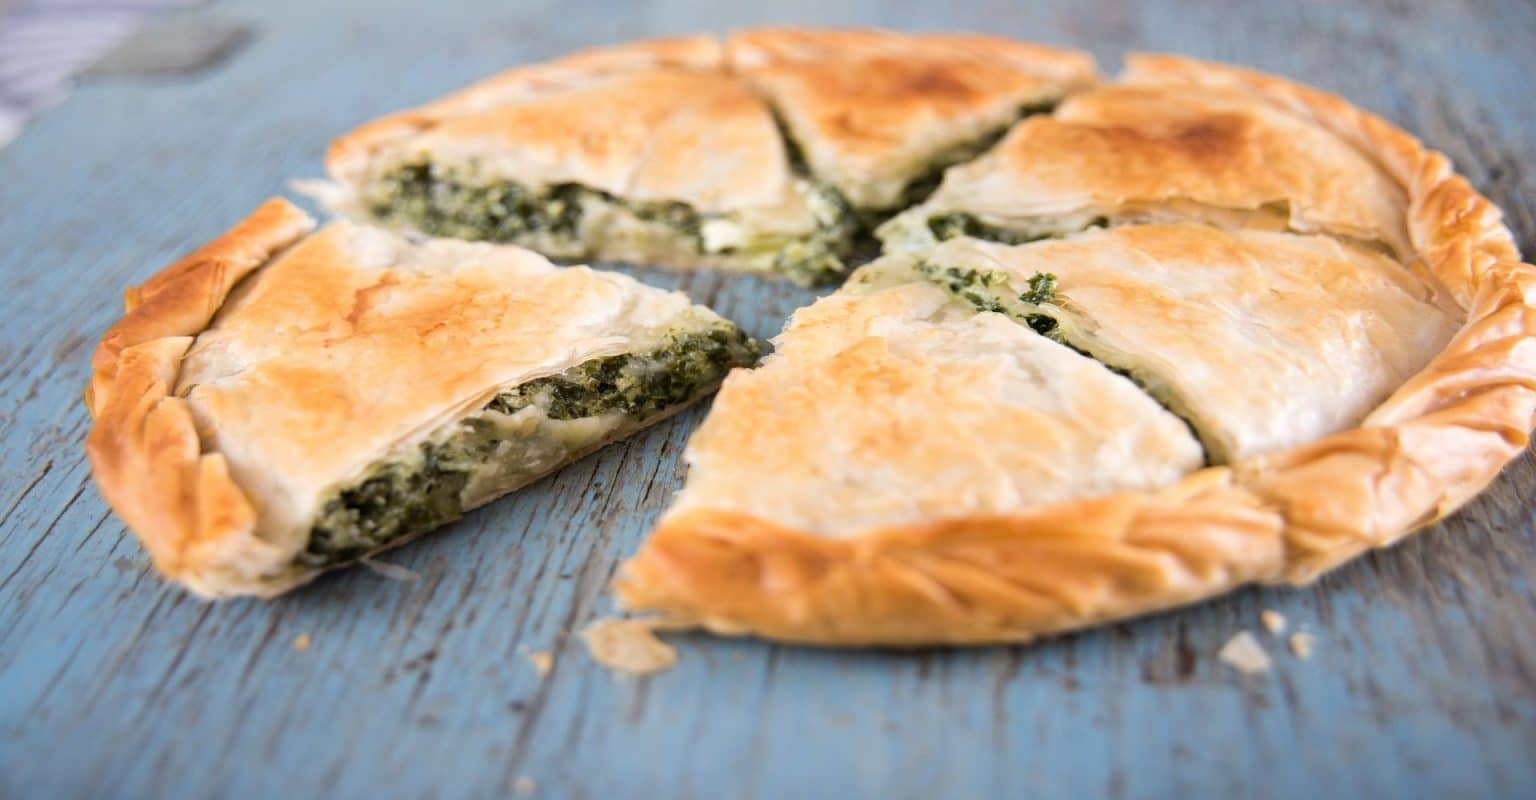 spinachpie by Greek chef Bakopoulos